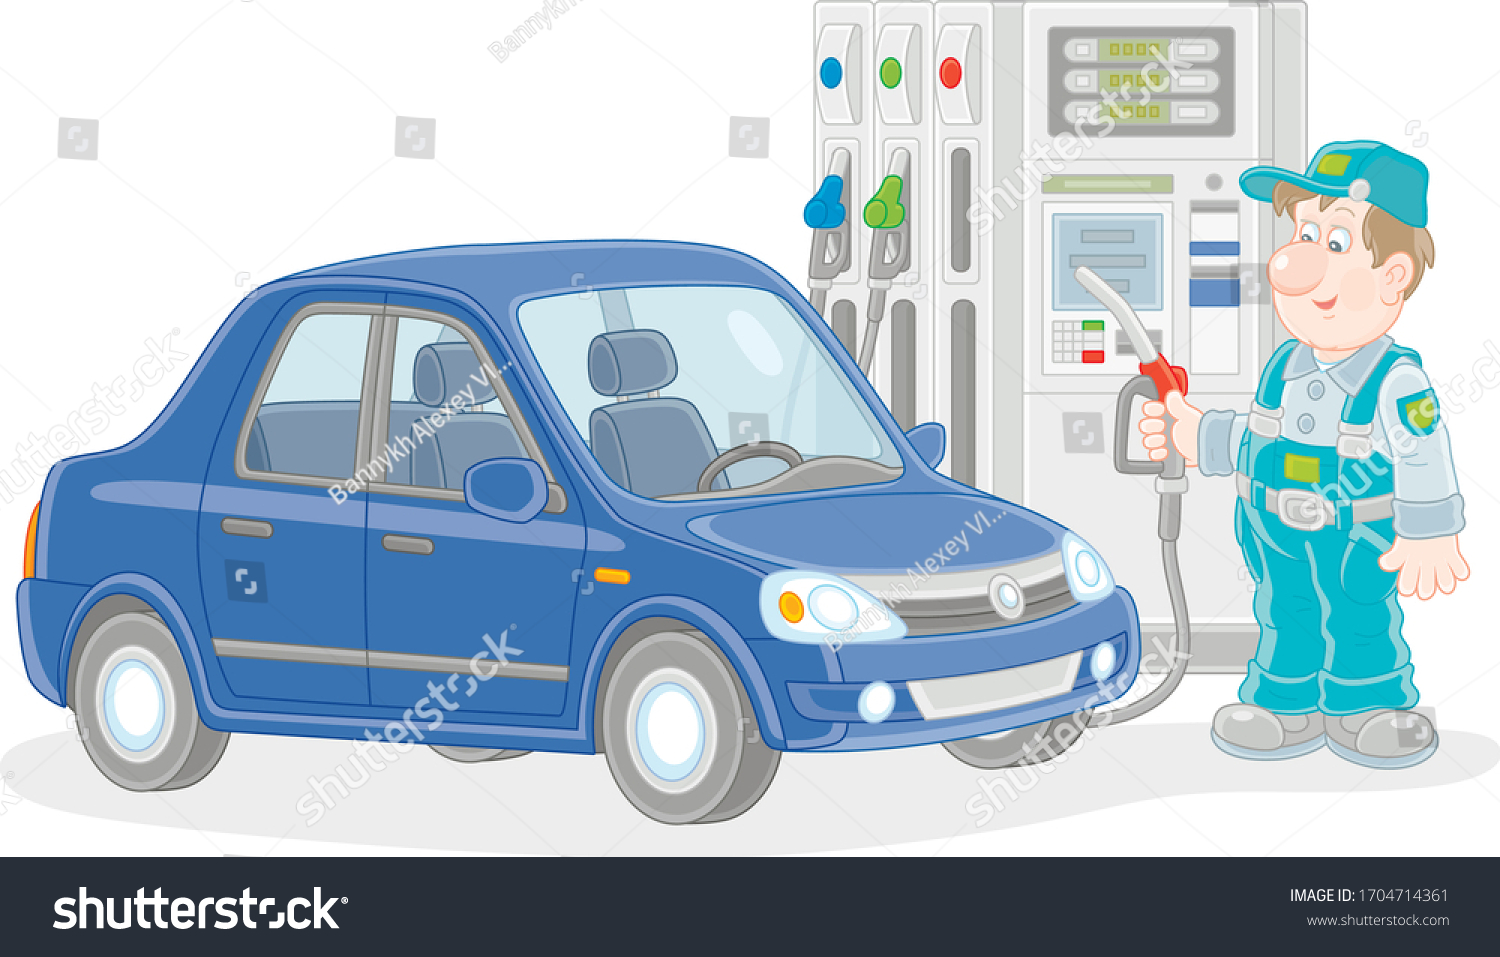 SVG of Car at a gas station with a refueling worker holding a fuel nozzle near a dispenser, vector cartoon illustration isolated on a white background svg